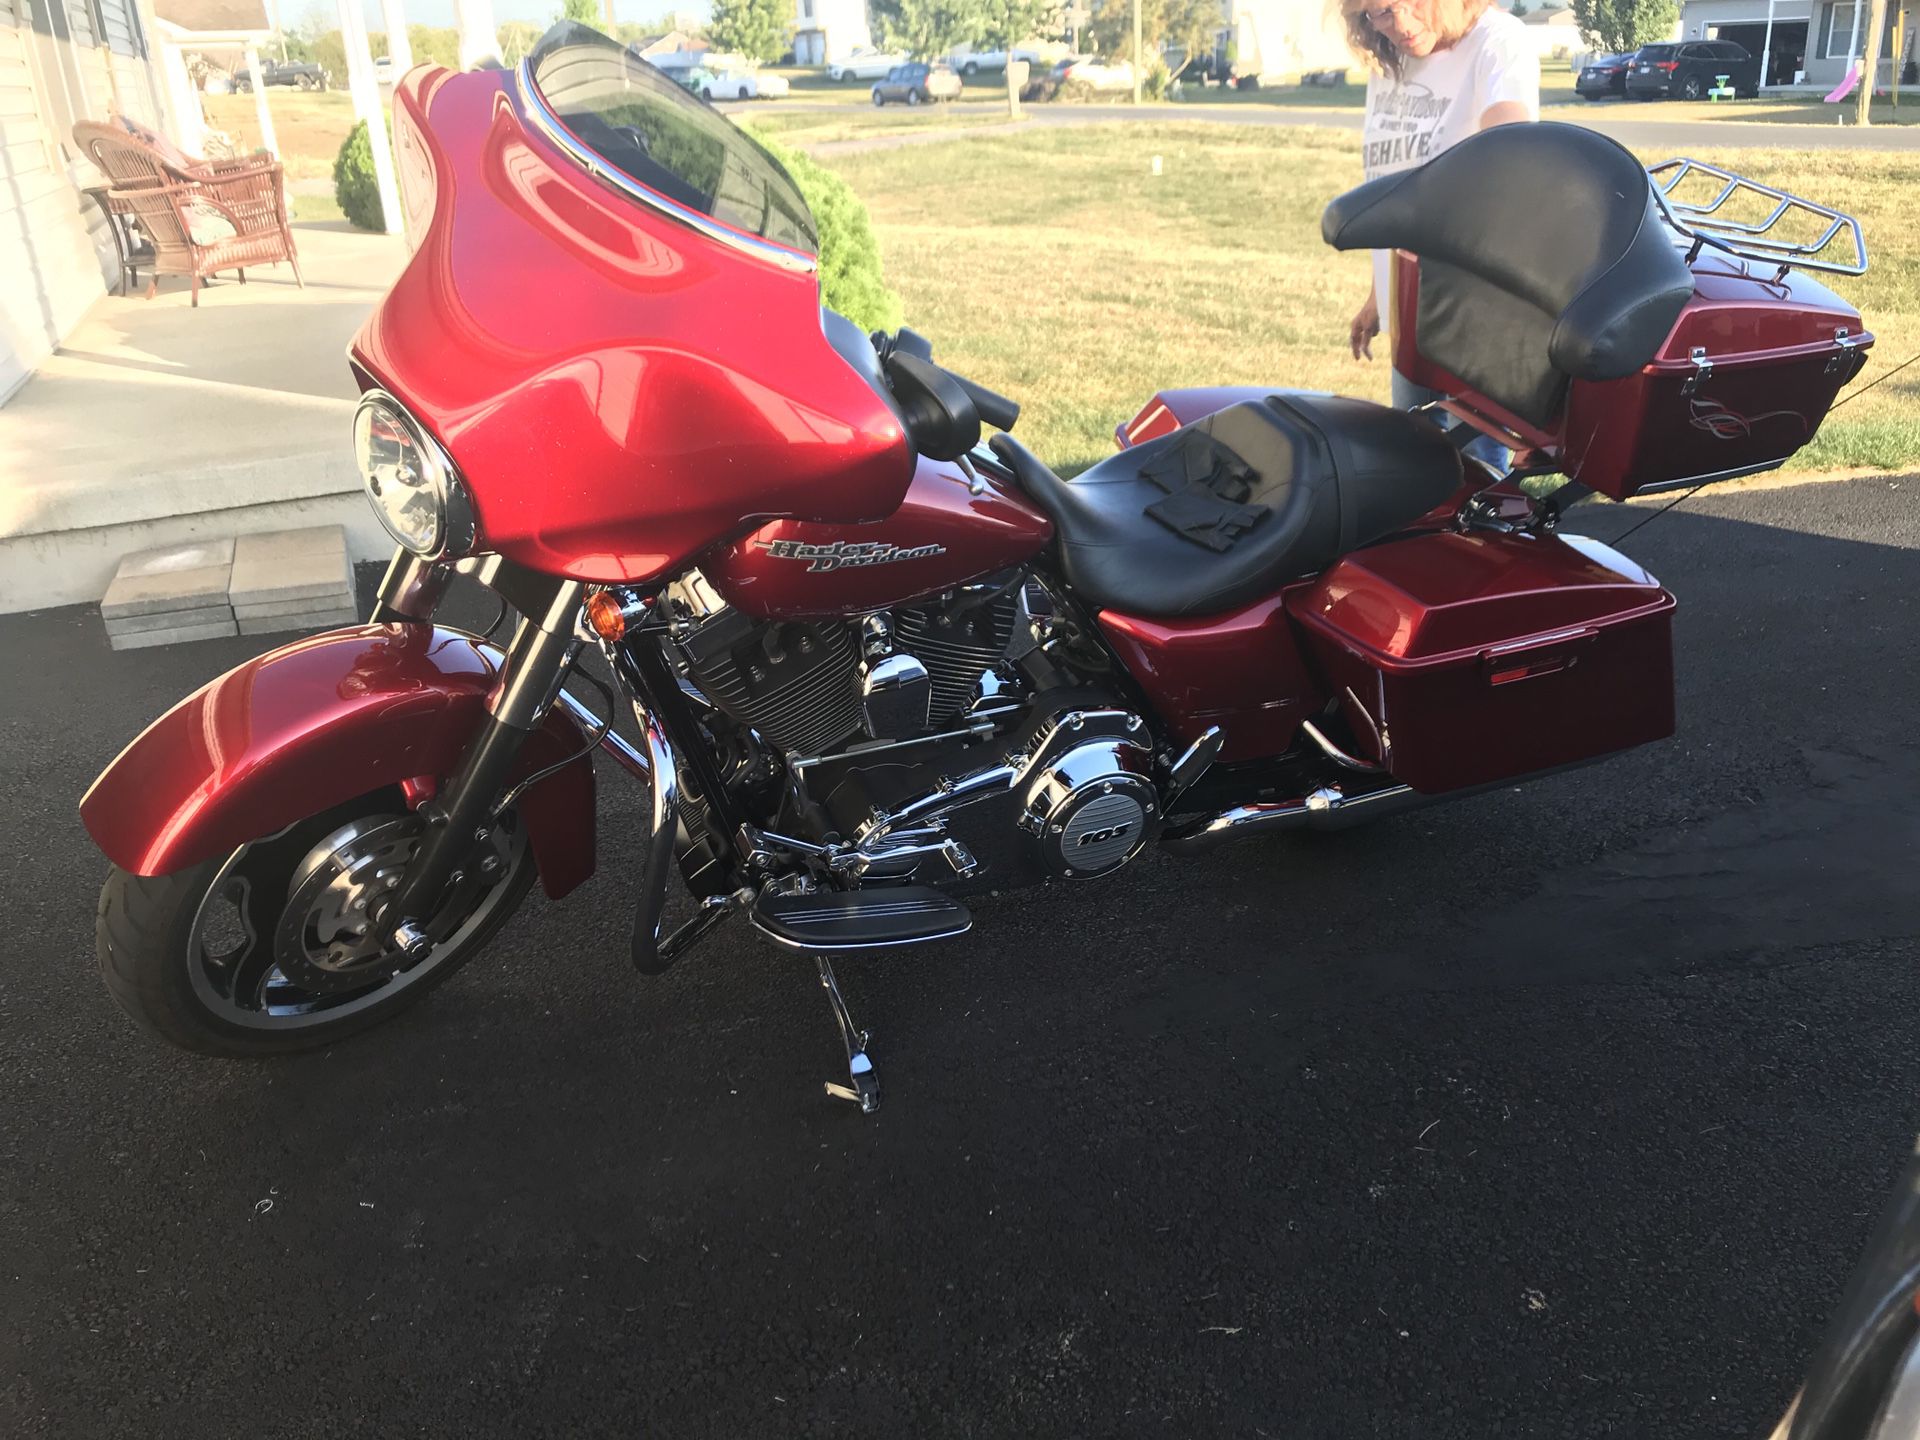 2013 Harley Davidson Street Glide with touring package.